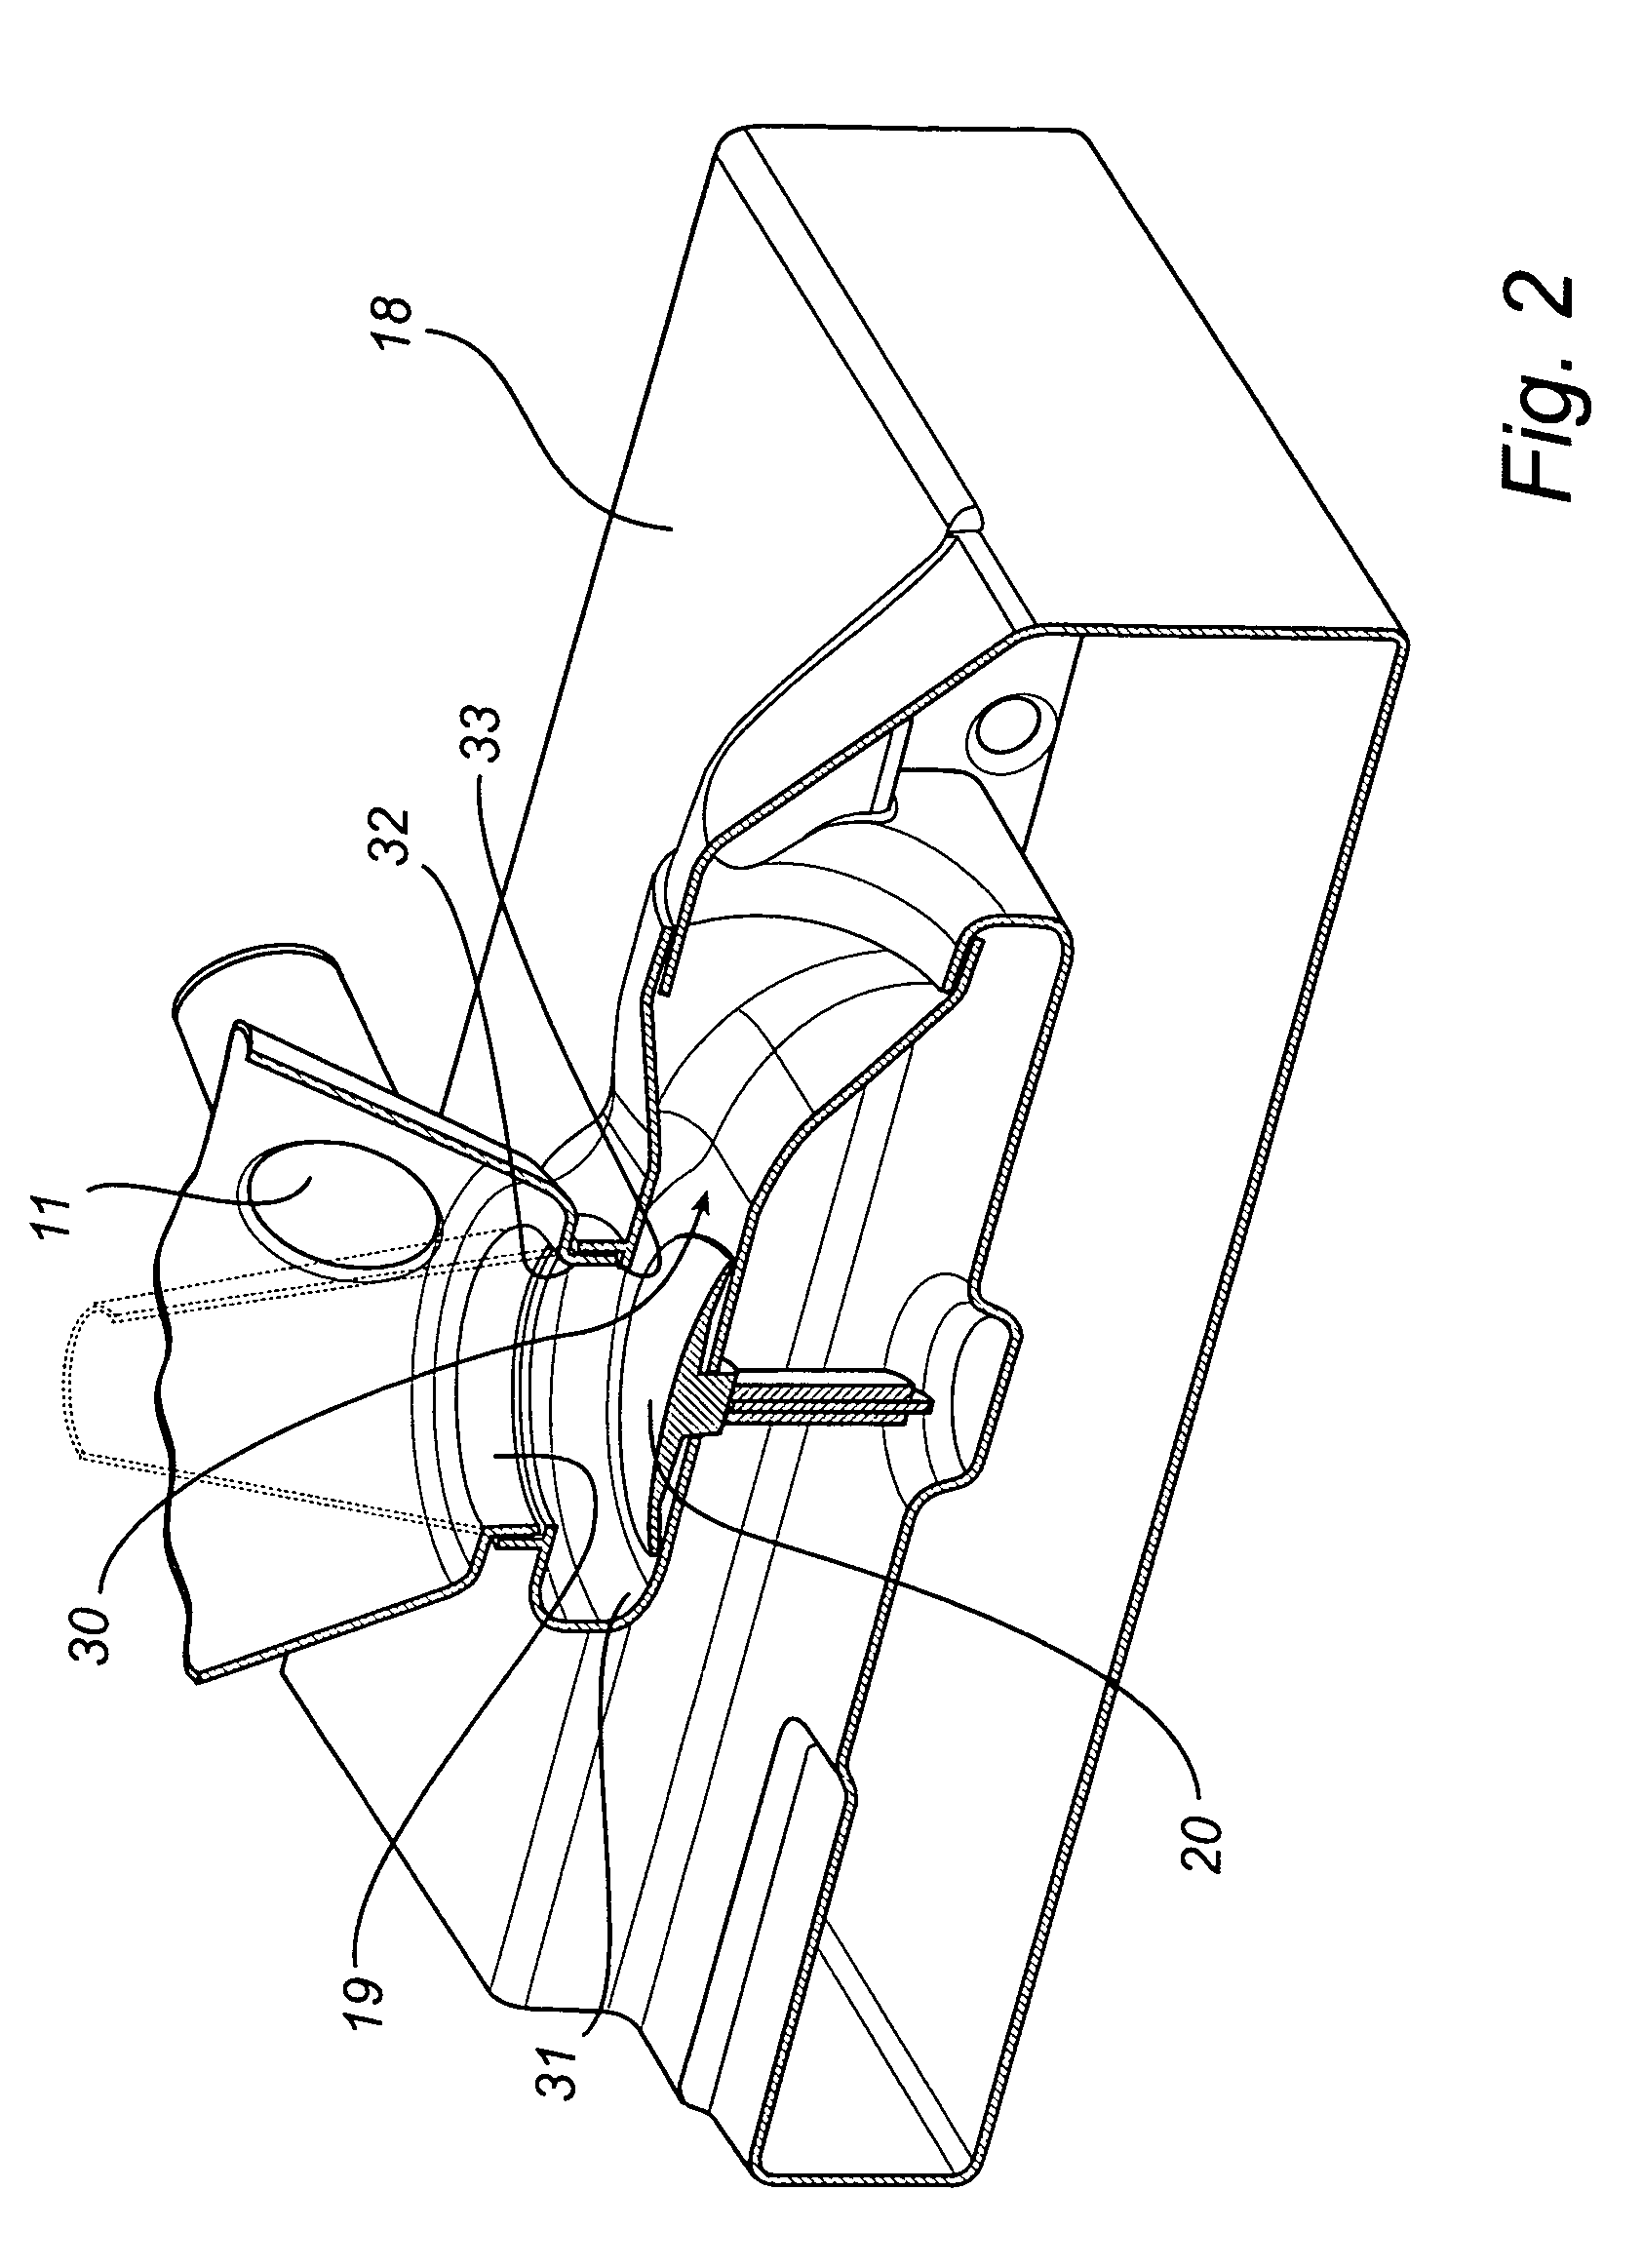 Outlet device for disinfection apparatus and method for liquid transfer